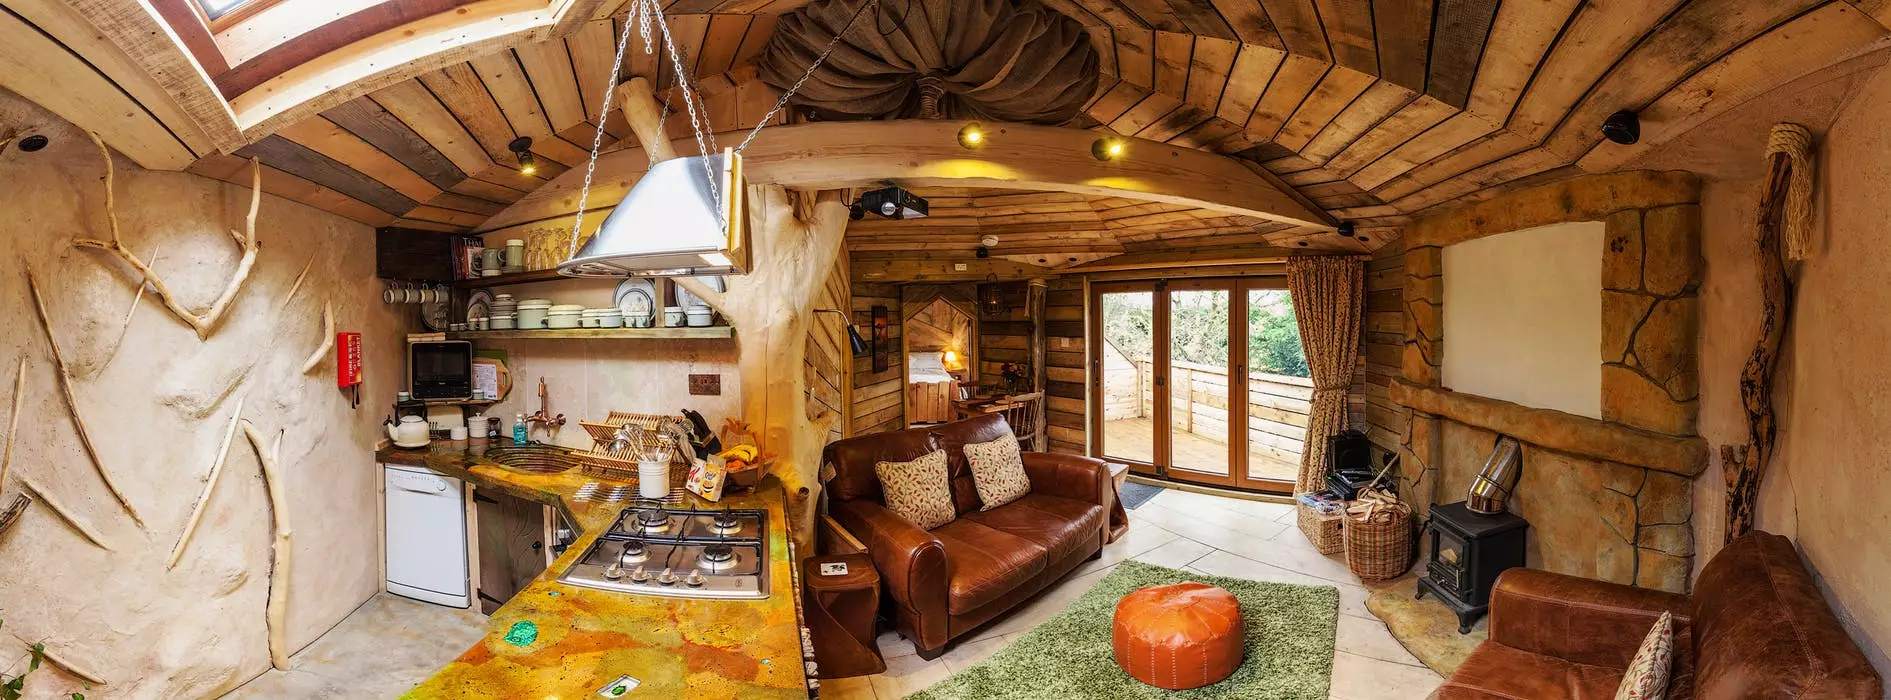 This whimsical treehouse looks so dreamy (